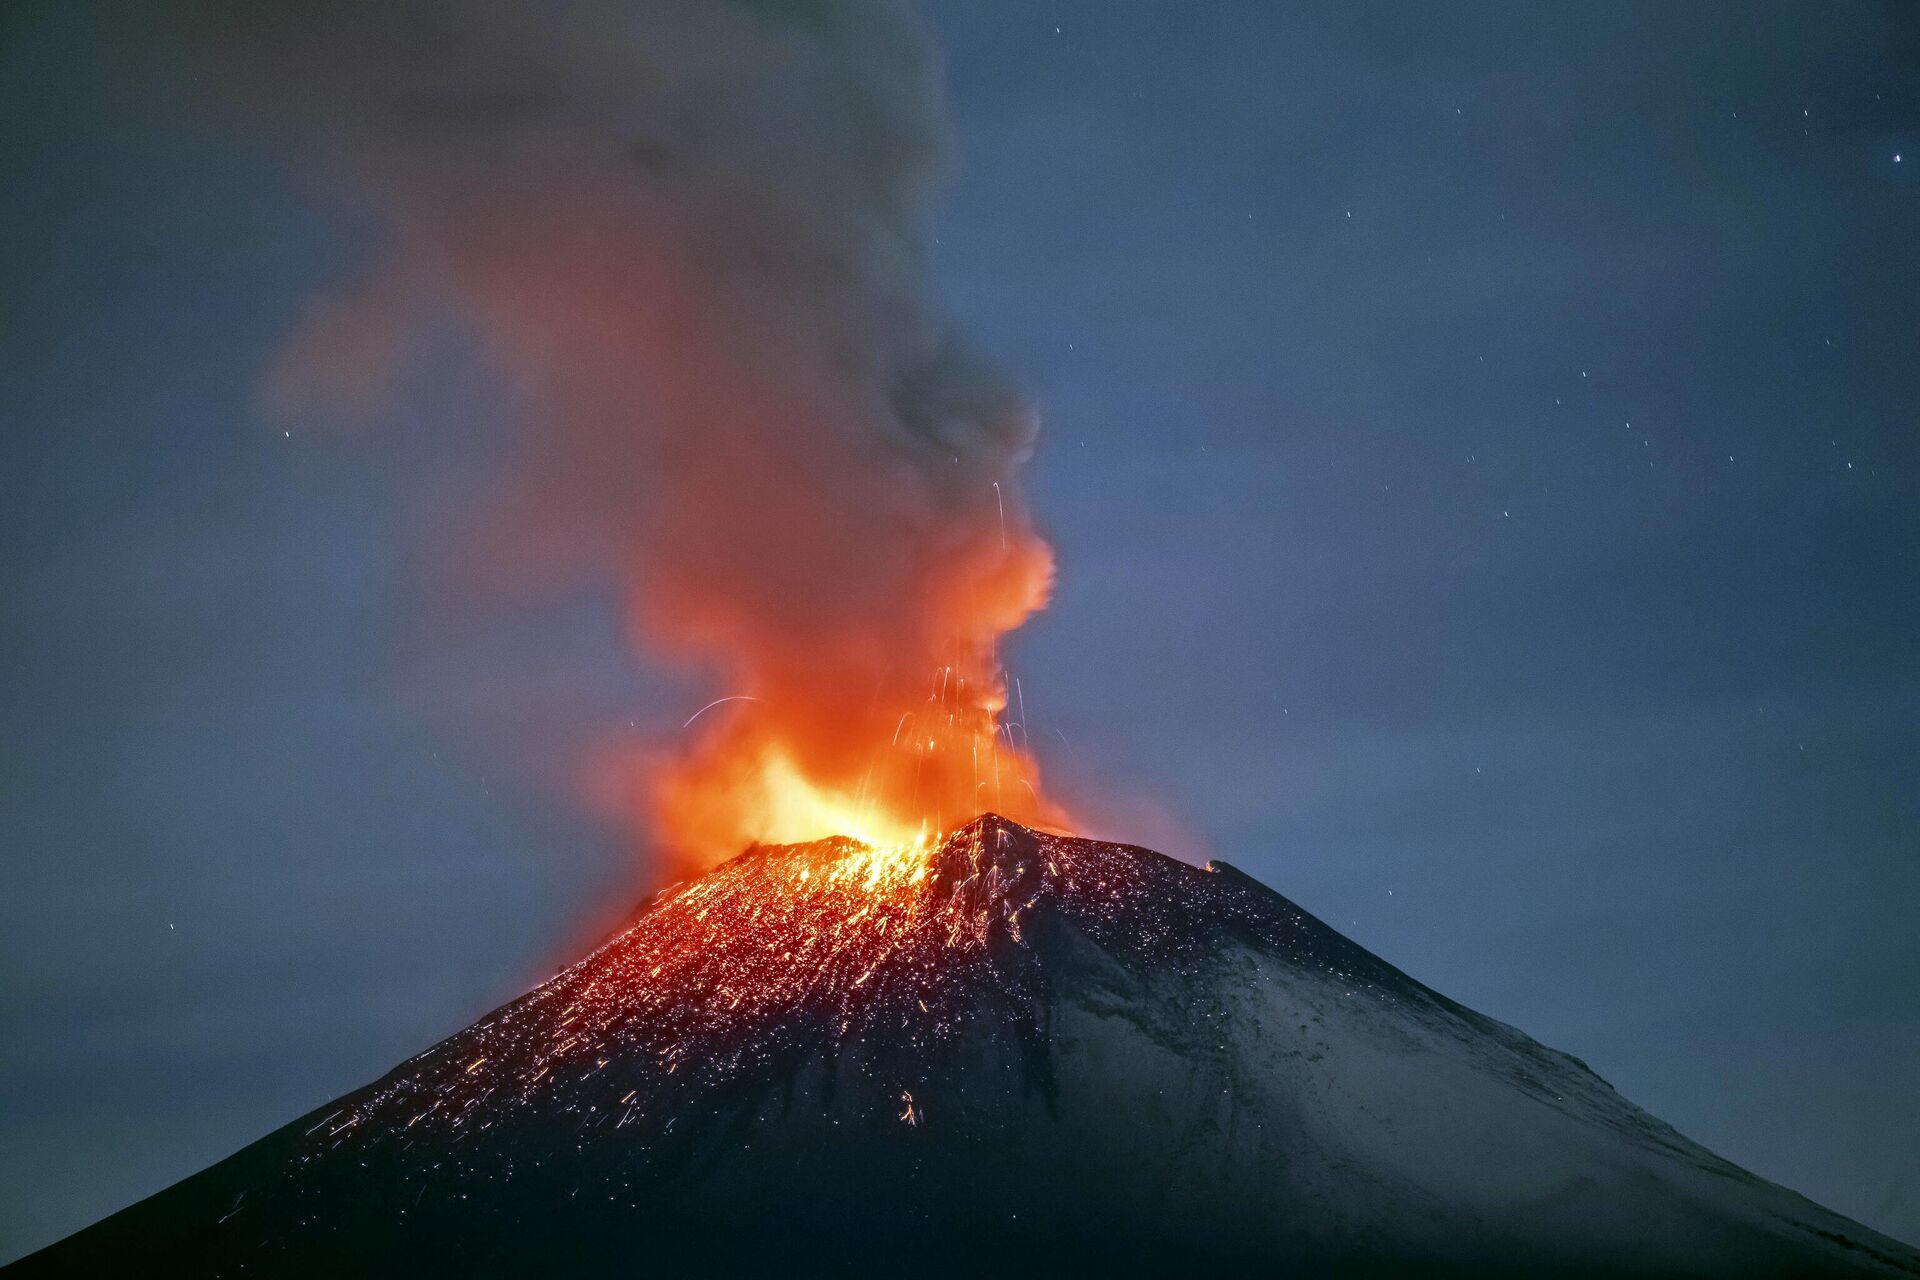 Incandescent materials, ash and smoke are spewed from the Popocatepetl volcano as seen from thr Santiago Xalitzintla community, state of Puebla, Mexico, on May 22, 2023. Mexican authorities on May 21 raised the warning level for the Popocatepetl volcano to one step below red alert, as smoke, ash and molten rock spewed into the sky posing risks to aviation and far-flung communities below. Sunday's increased alert level -- to yellow phase three -- comes a day after two Mexico City airports temporarily halted operations due to falling ash. - Sputnik International, 1920, 23.05.2023